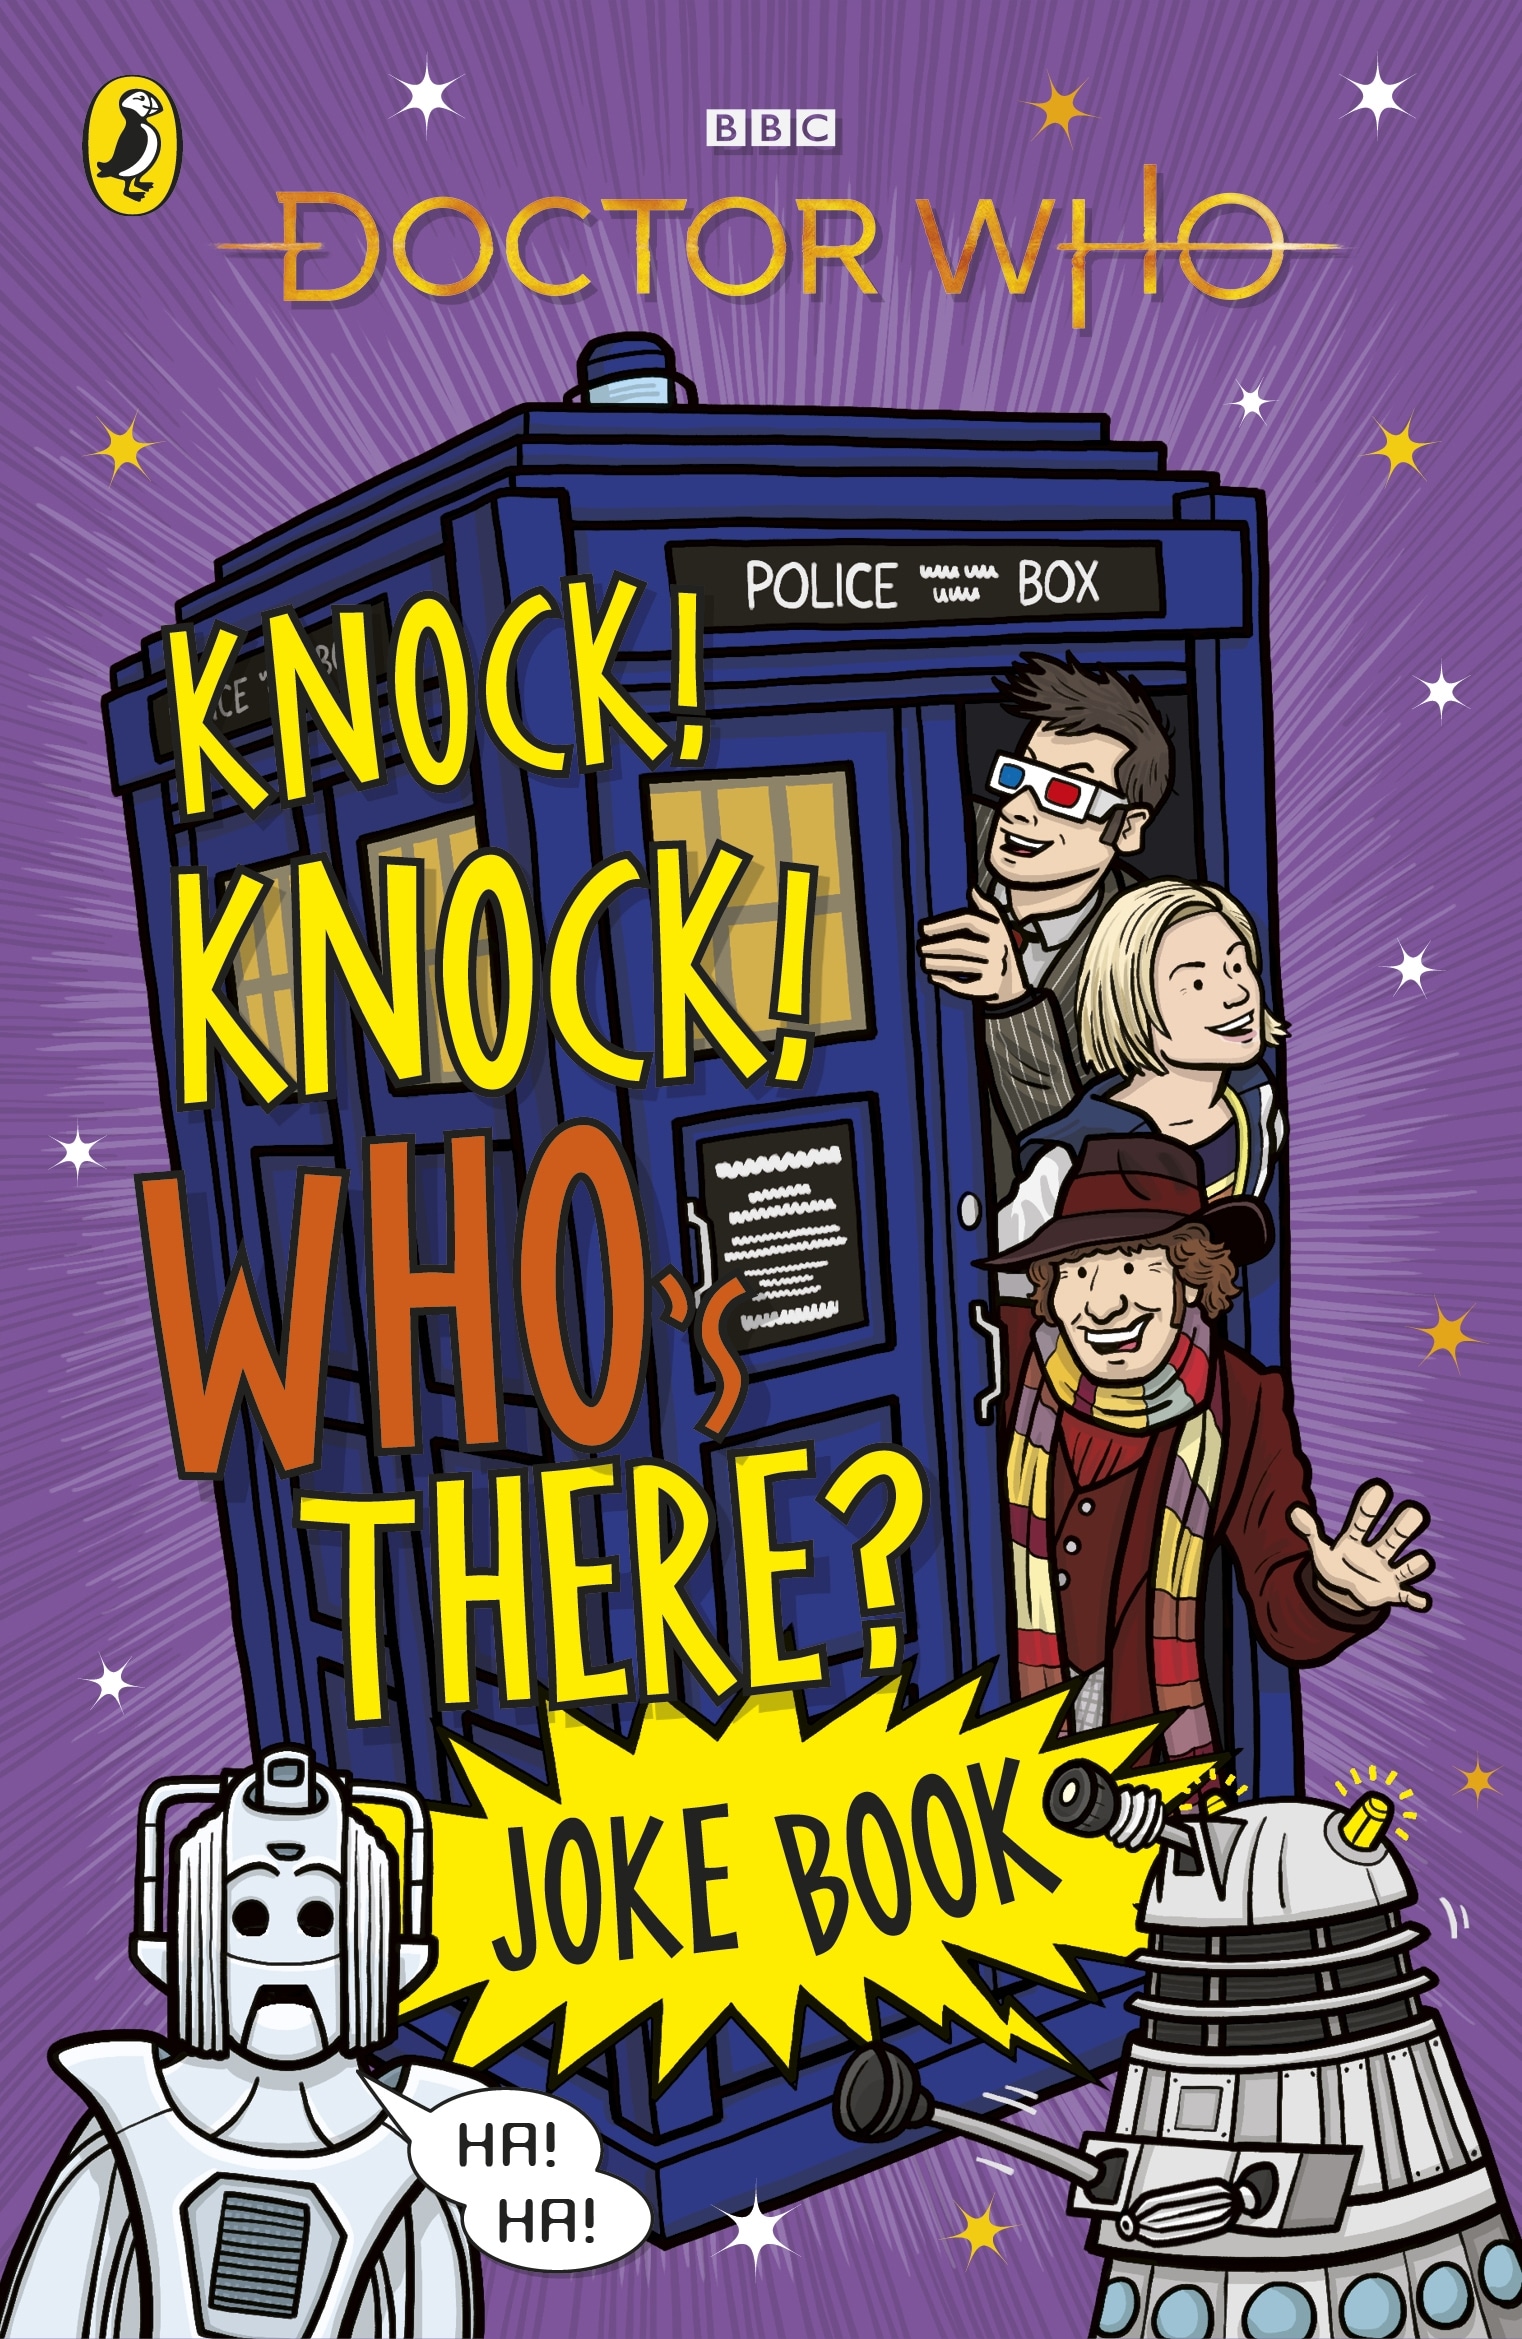 Book “Doctor Who: Knock! Knock! Who's There? Joke Book” by Doctor Who — July 23, 2020